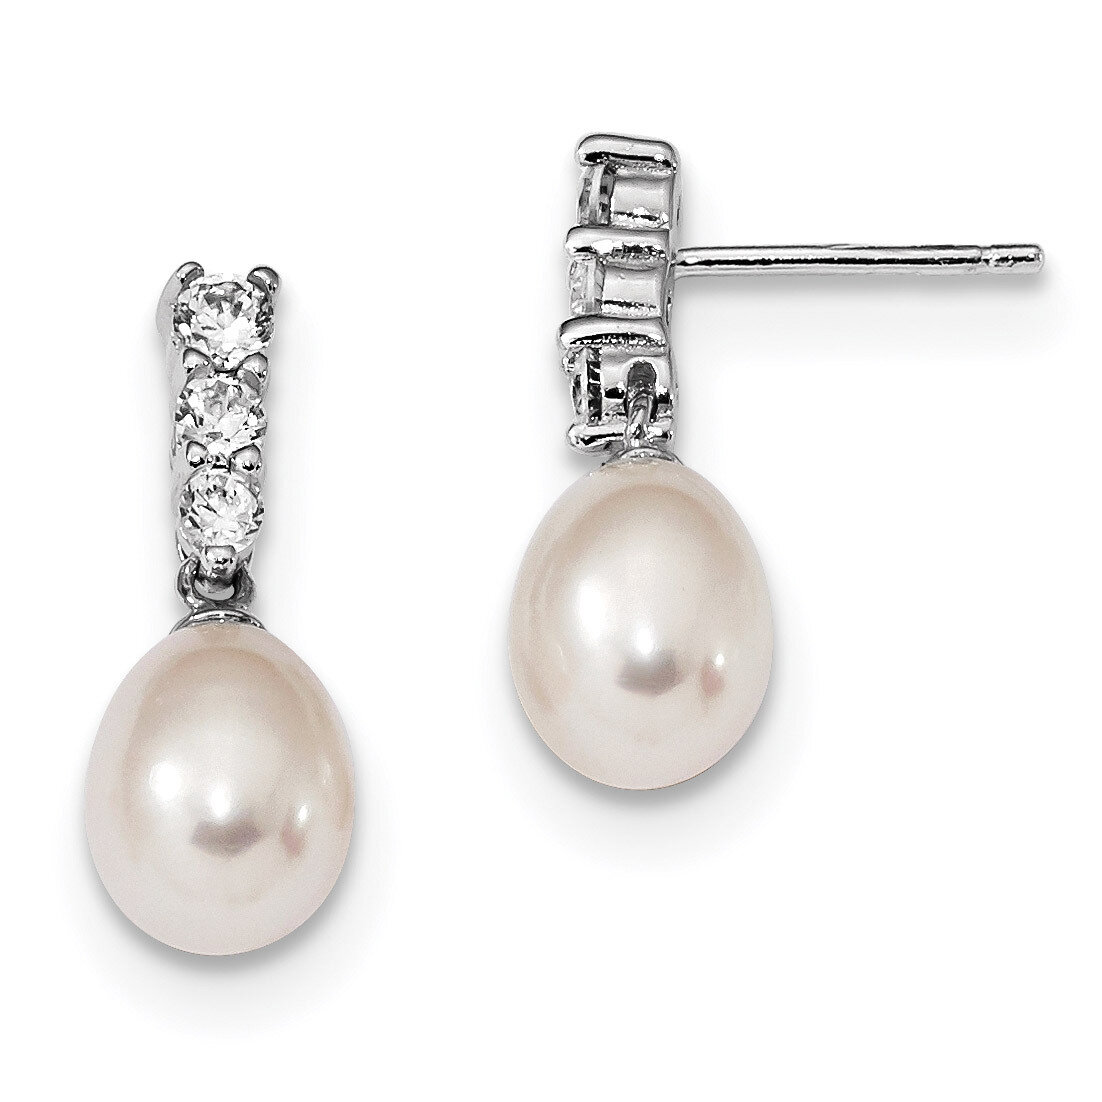 7-8mm White Cultured Freshwater Pearl CZ Diamond Post Earrings Sterling Silver Rhodium-plated QE13859